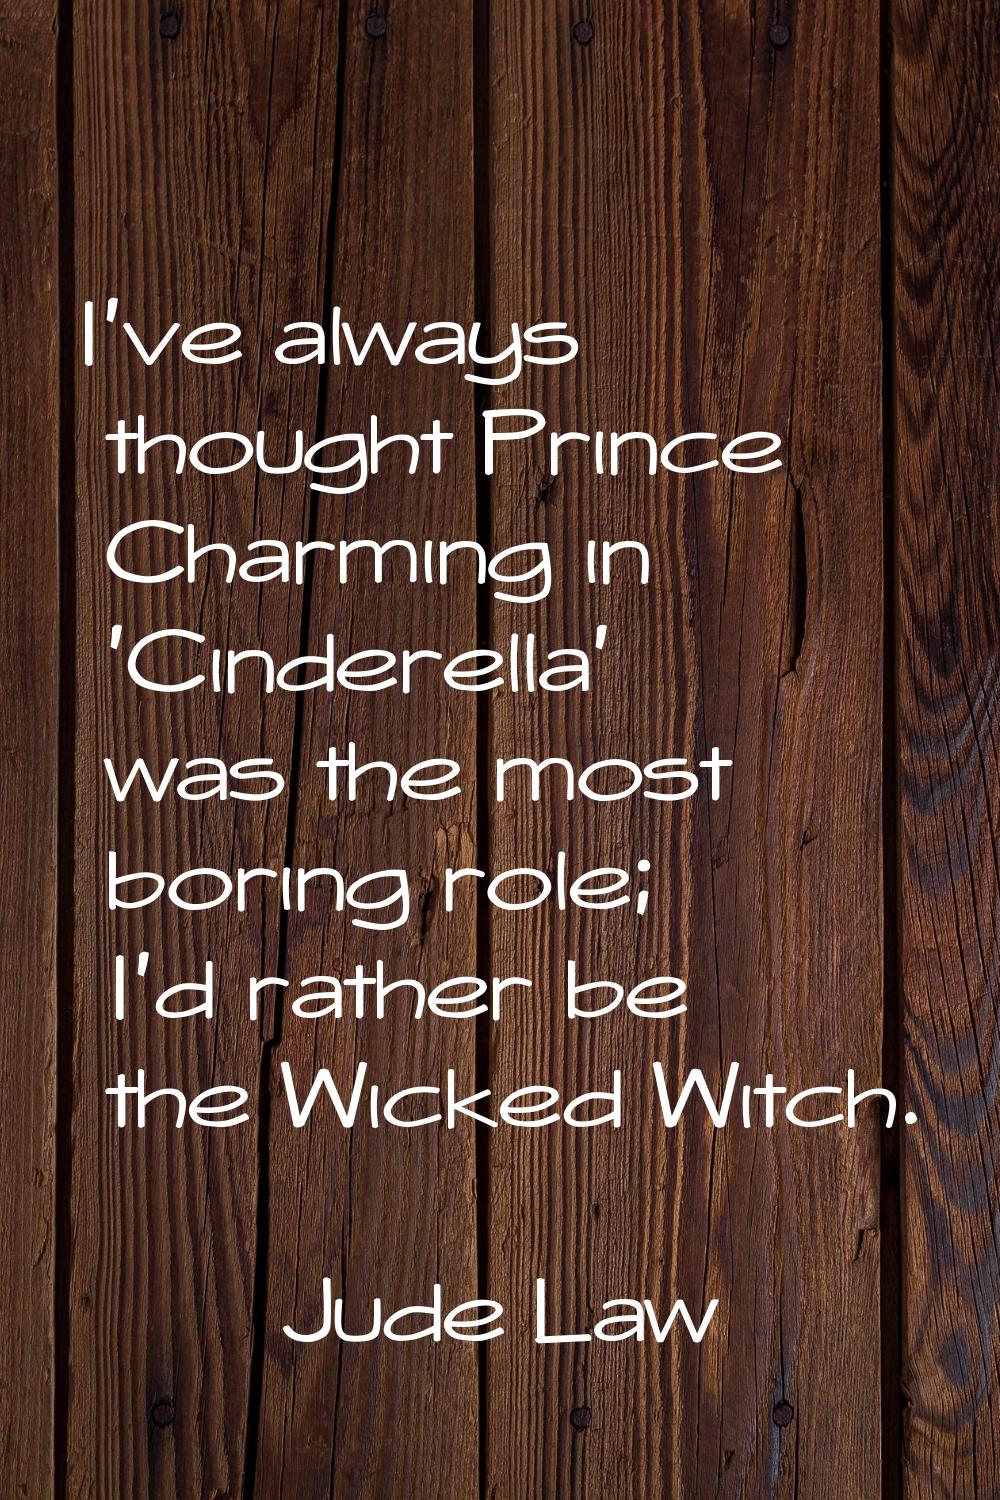 I've always thought Prince Charming in 'Cinderella' was the most boring role; I'd rather be the Wic